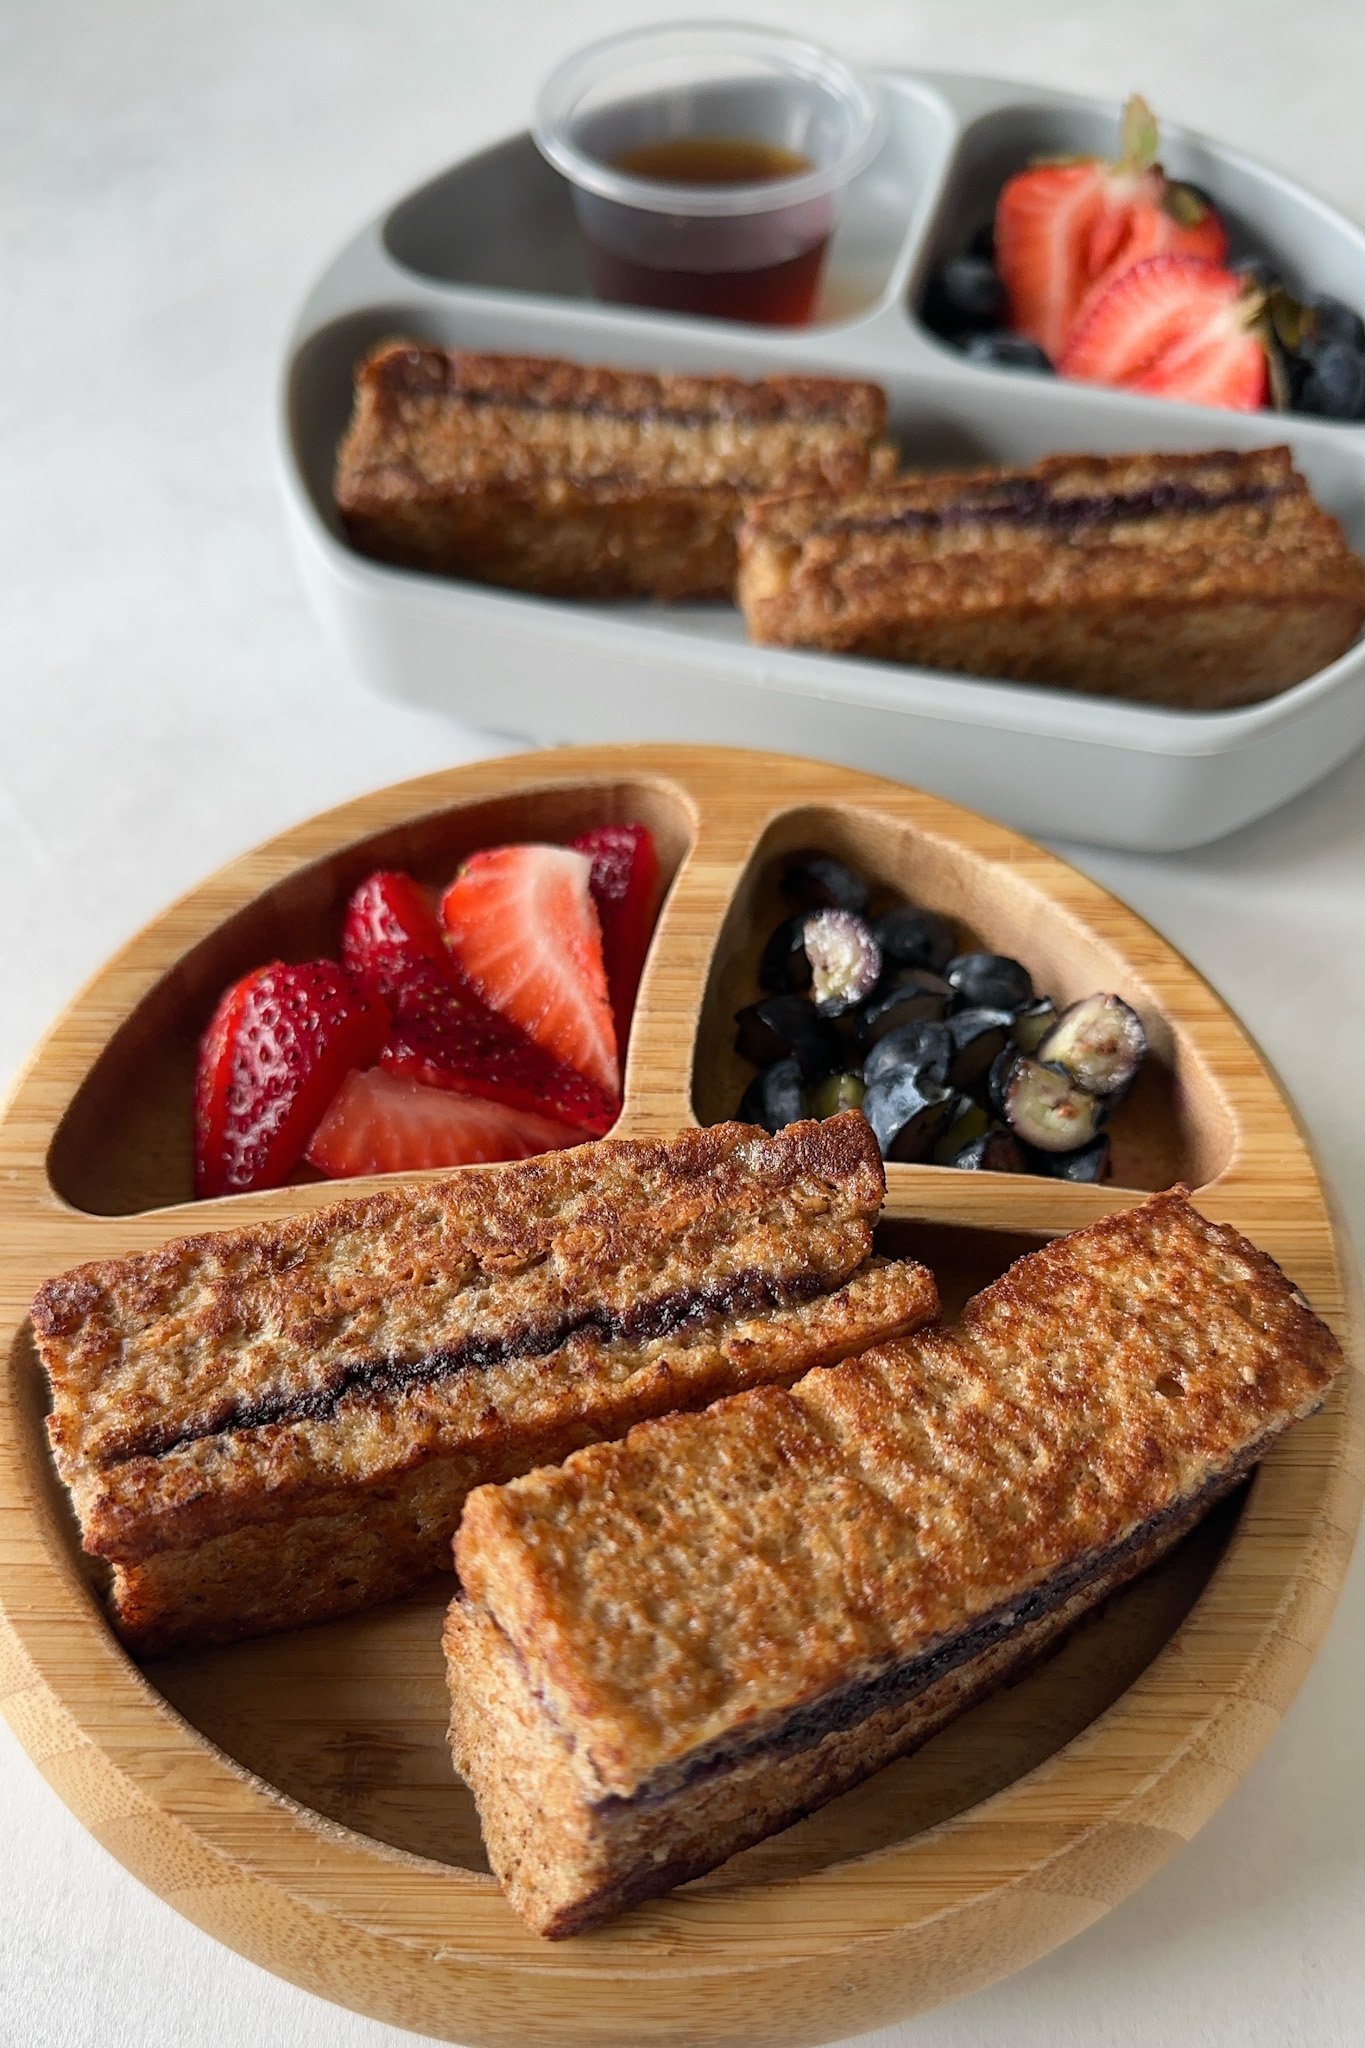 Peanut butter and jelly French toast served with berries and maple syrup.